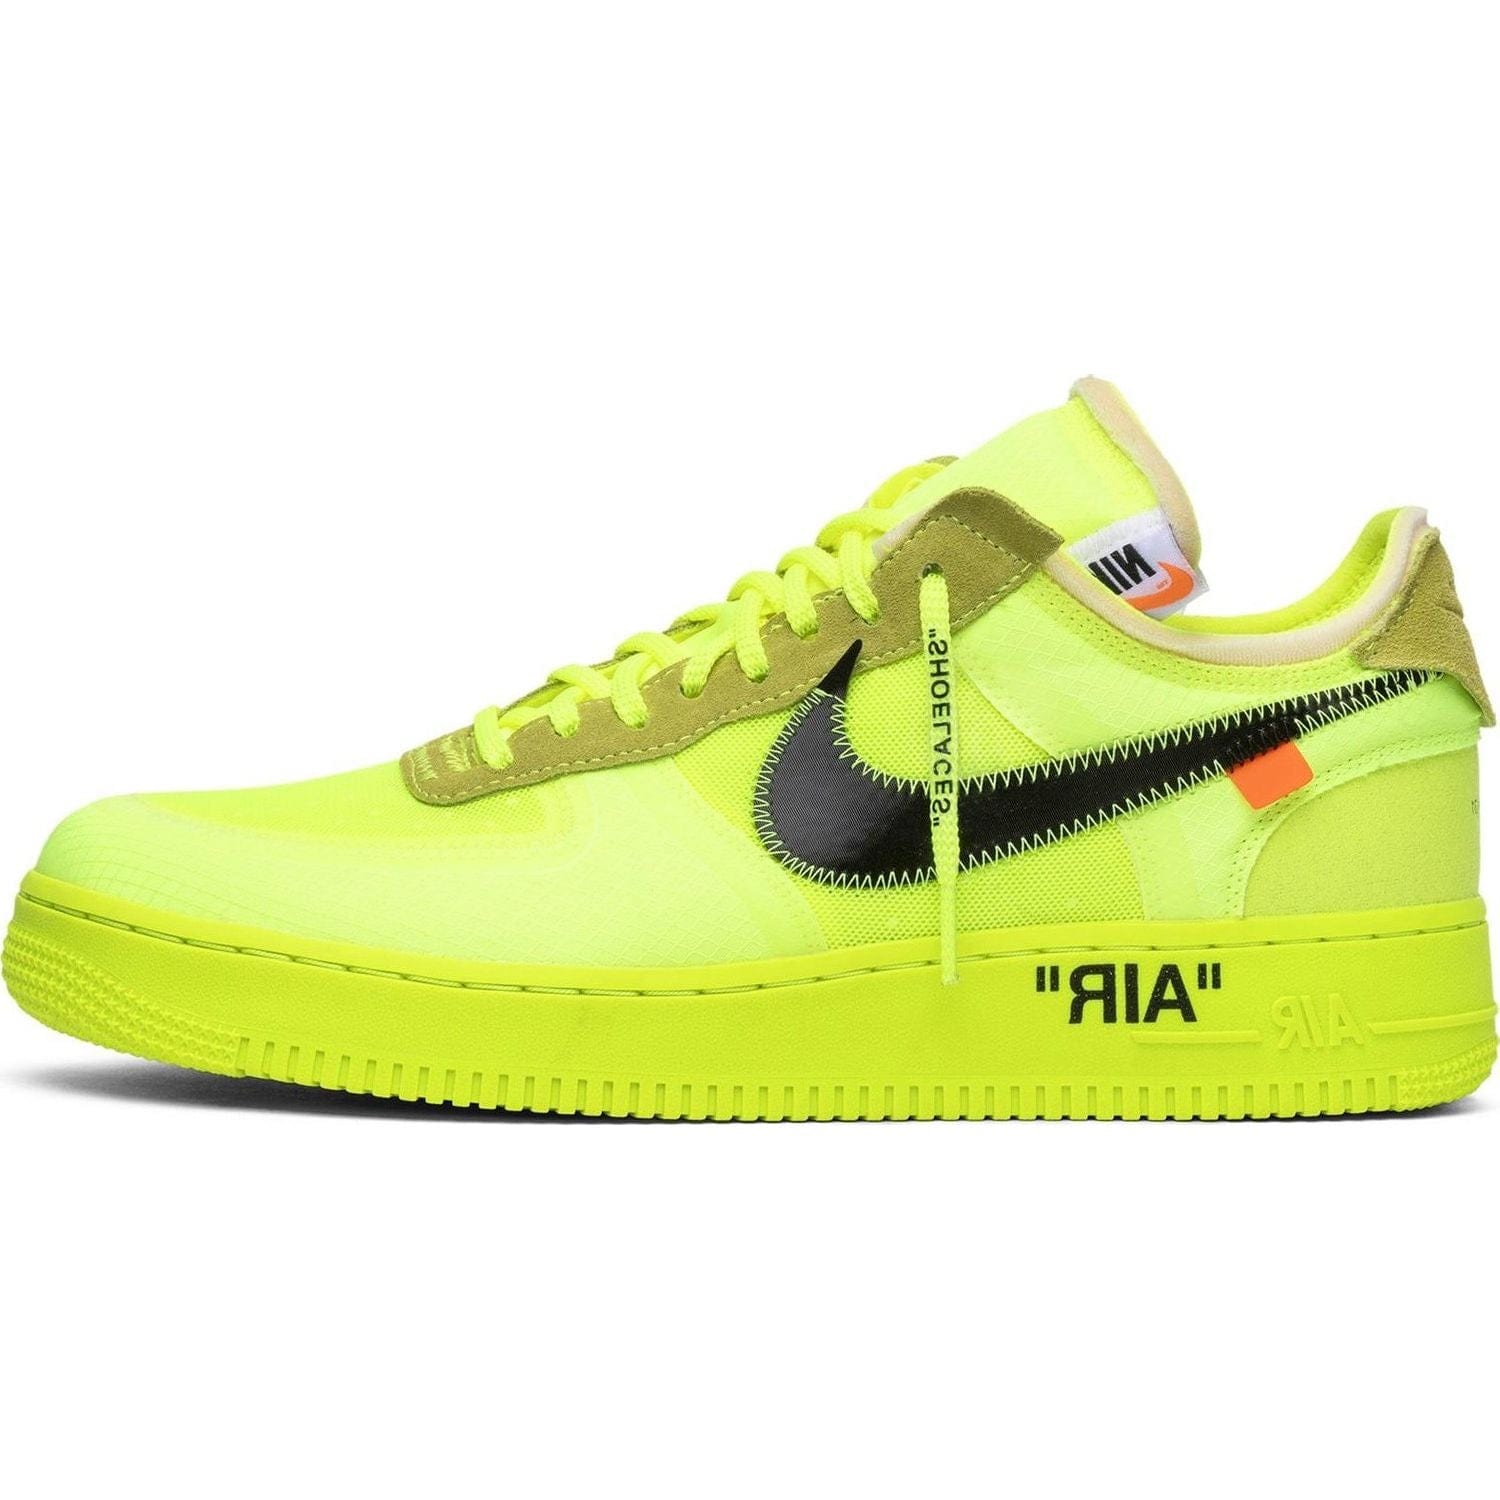 Nike Air Force 1 Low Off-White Volt US8M - US9.5W Nike